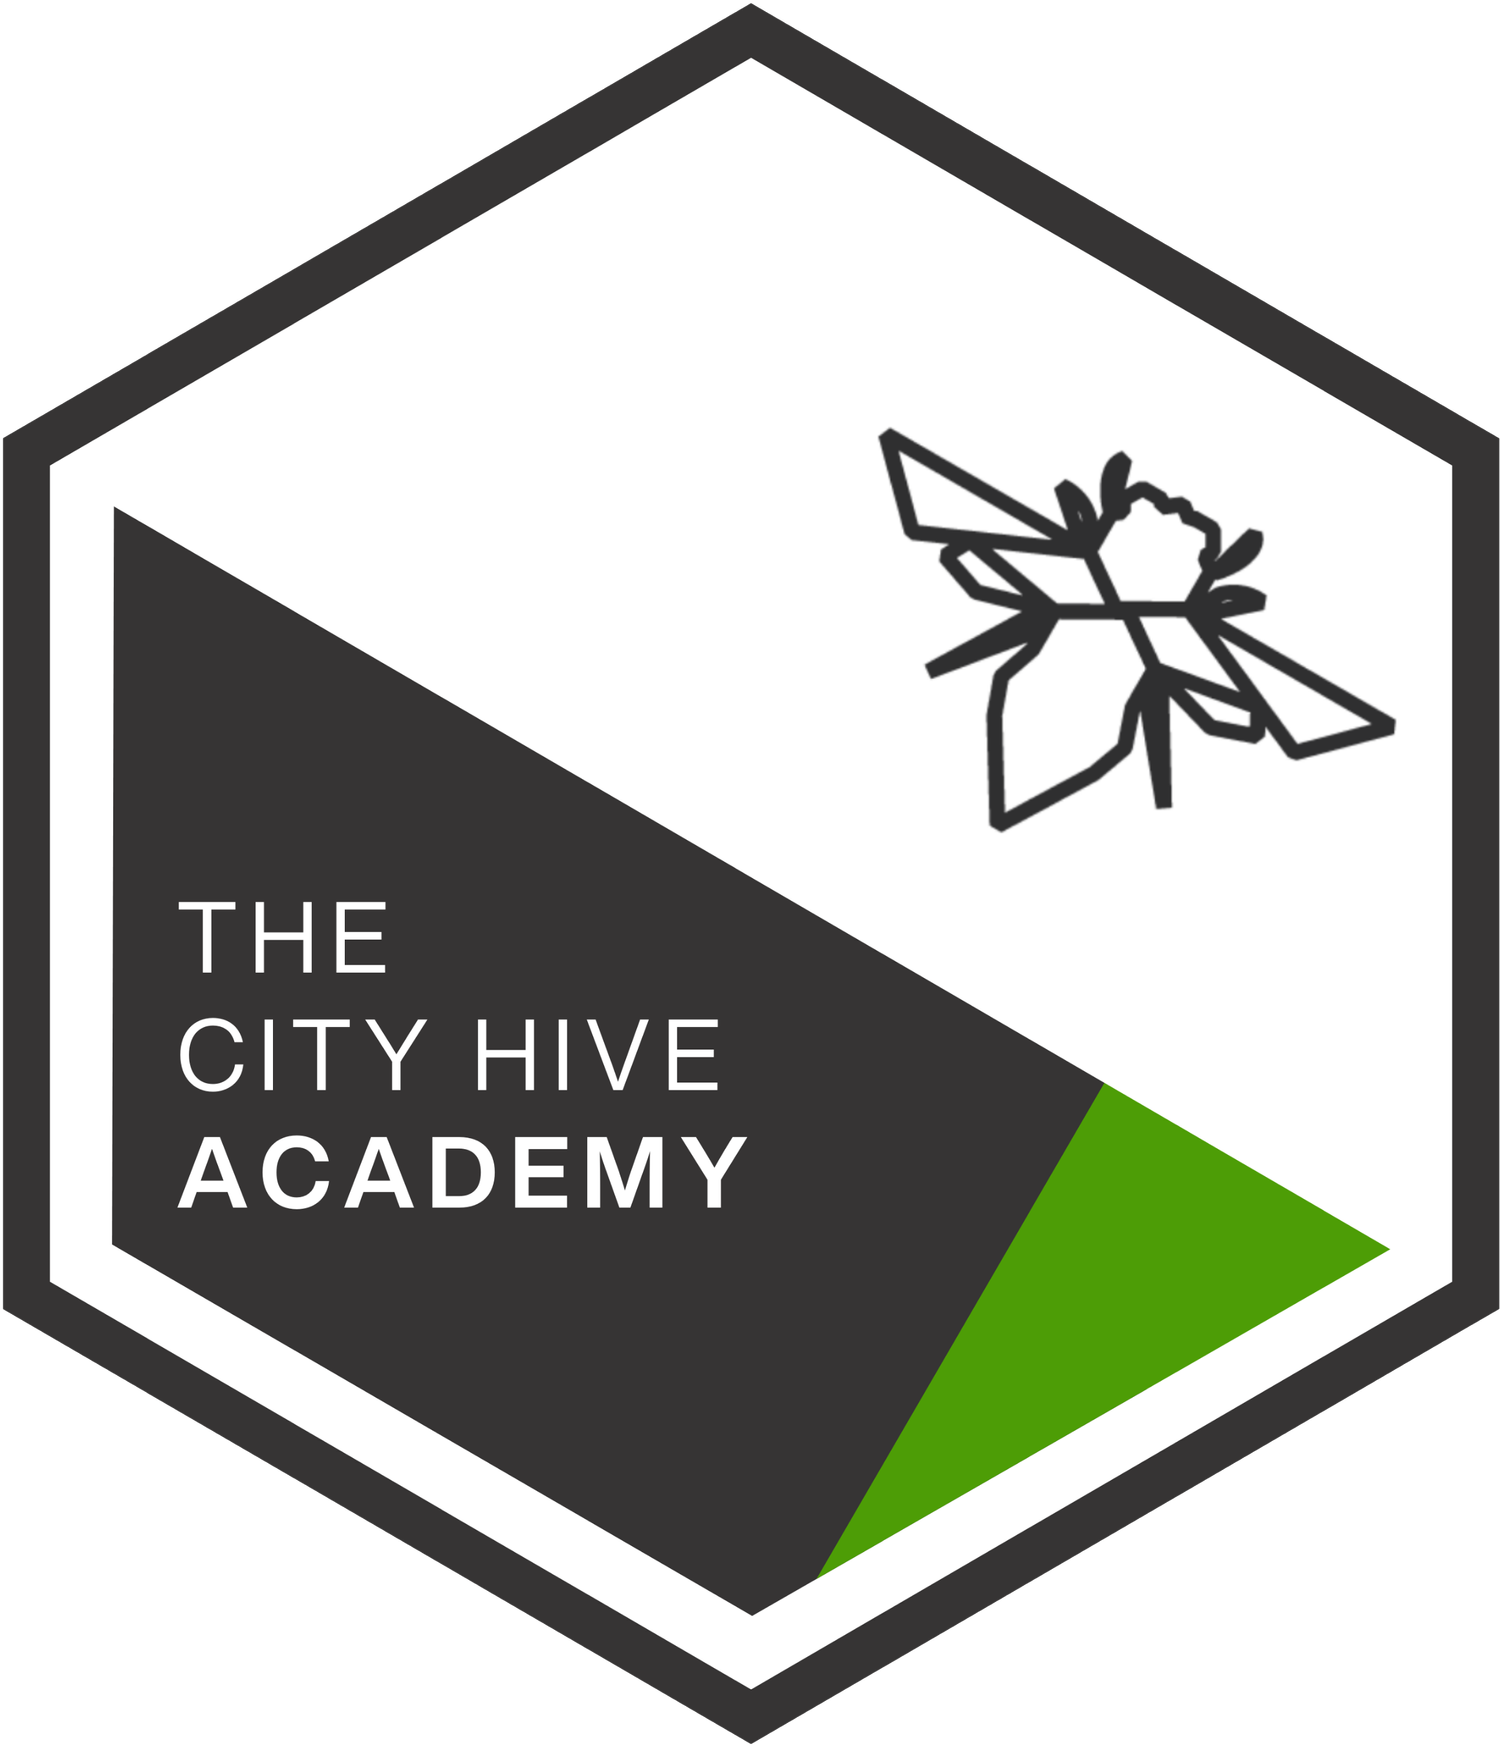 The City Hive Academy